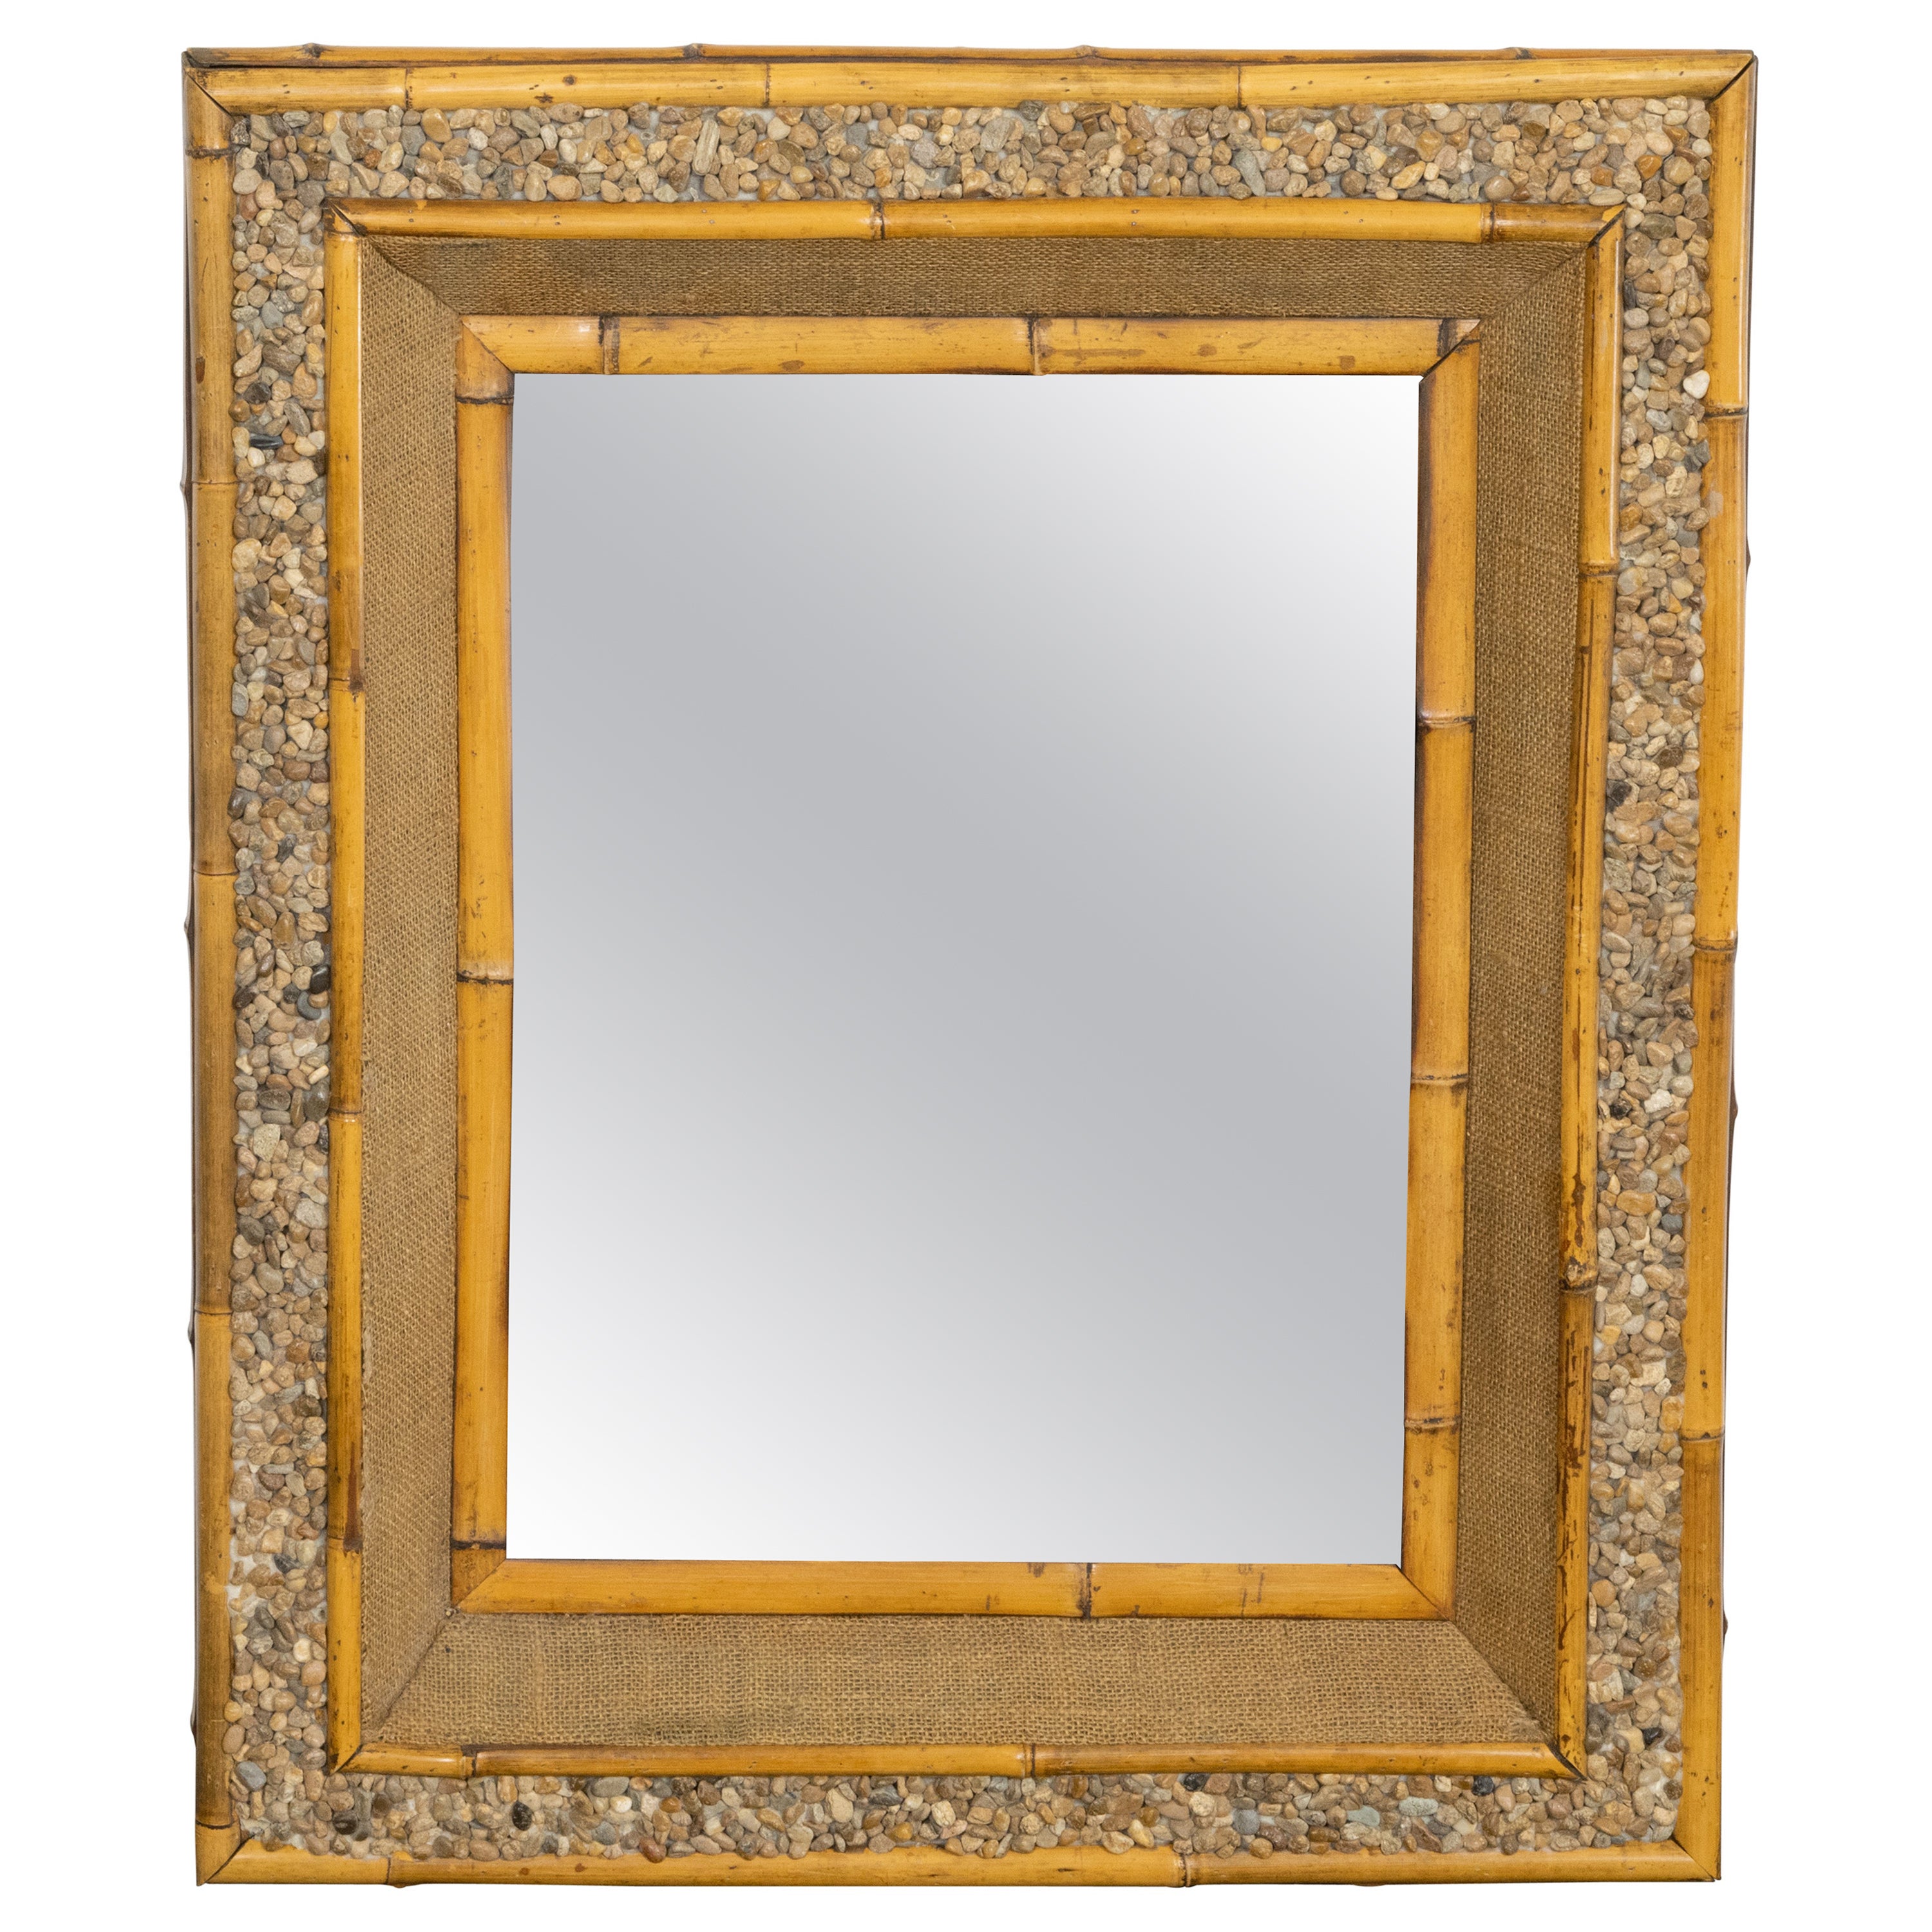 English Bamboo, Rocks and Burlap Rectangular Mirror from the Mid-Century Period